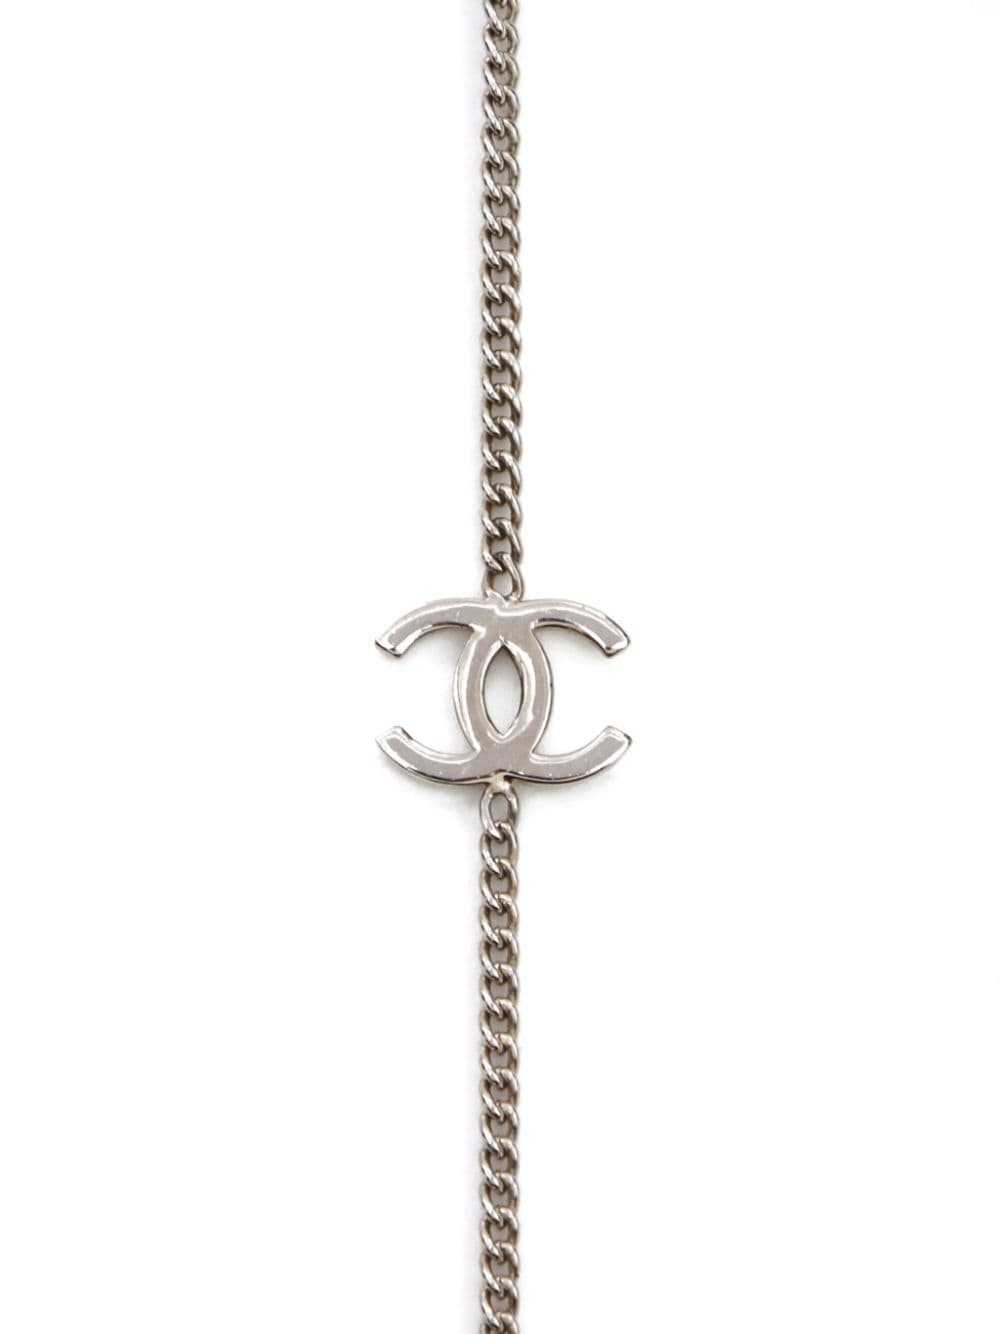 CHANEL Pre-Owned 1997 CC chain necklace - Silver - image 2